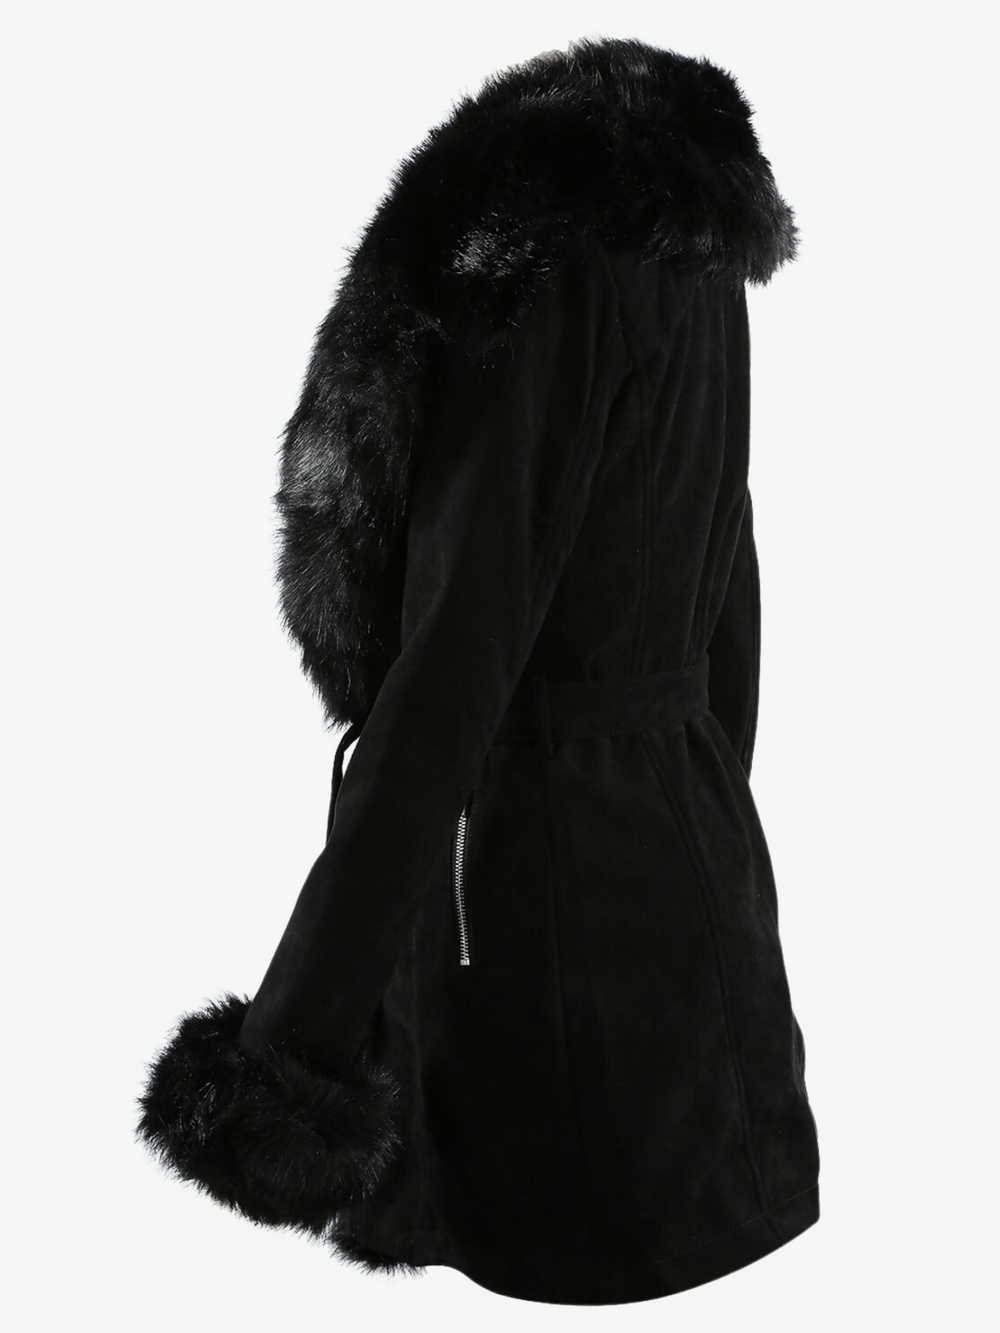 Ghost manequin wears a black longline faux suede coat with black faux fur collar and black faux fur cuffs.  Ghost manequin stands to the side. The side of the coat and the plunging faux fur collar and faux fur cuffs are visible. 